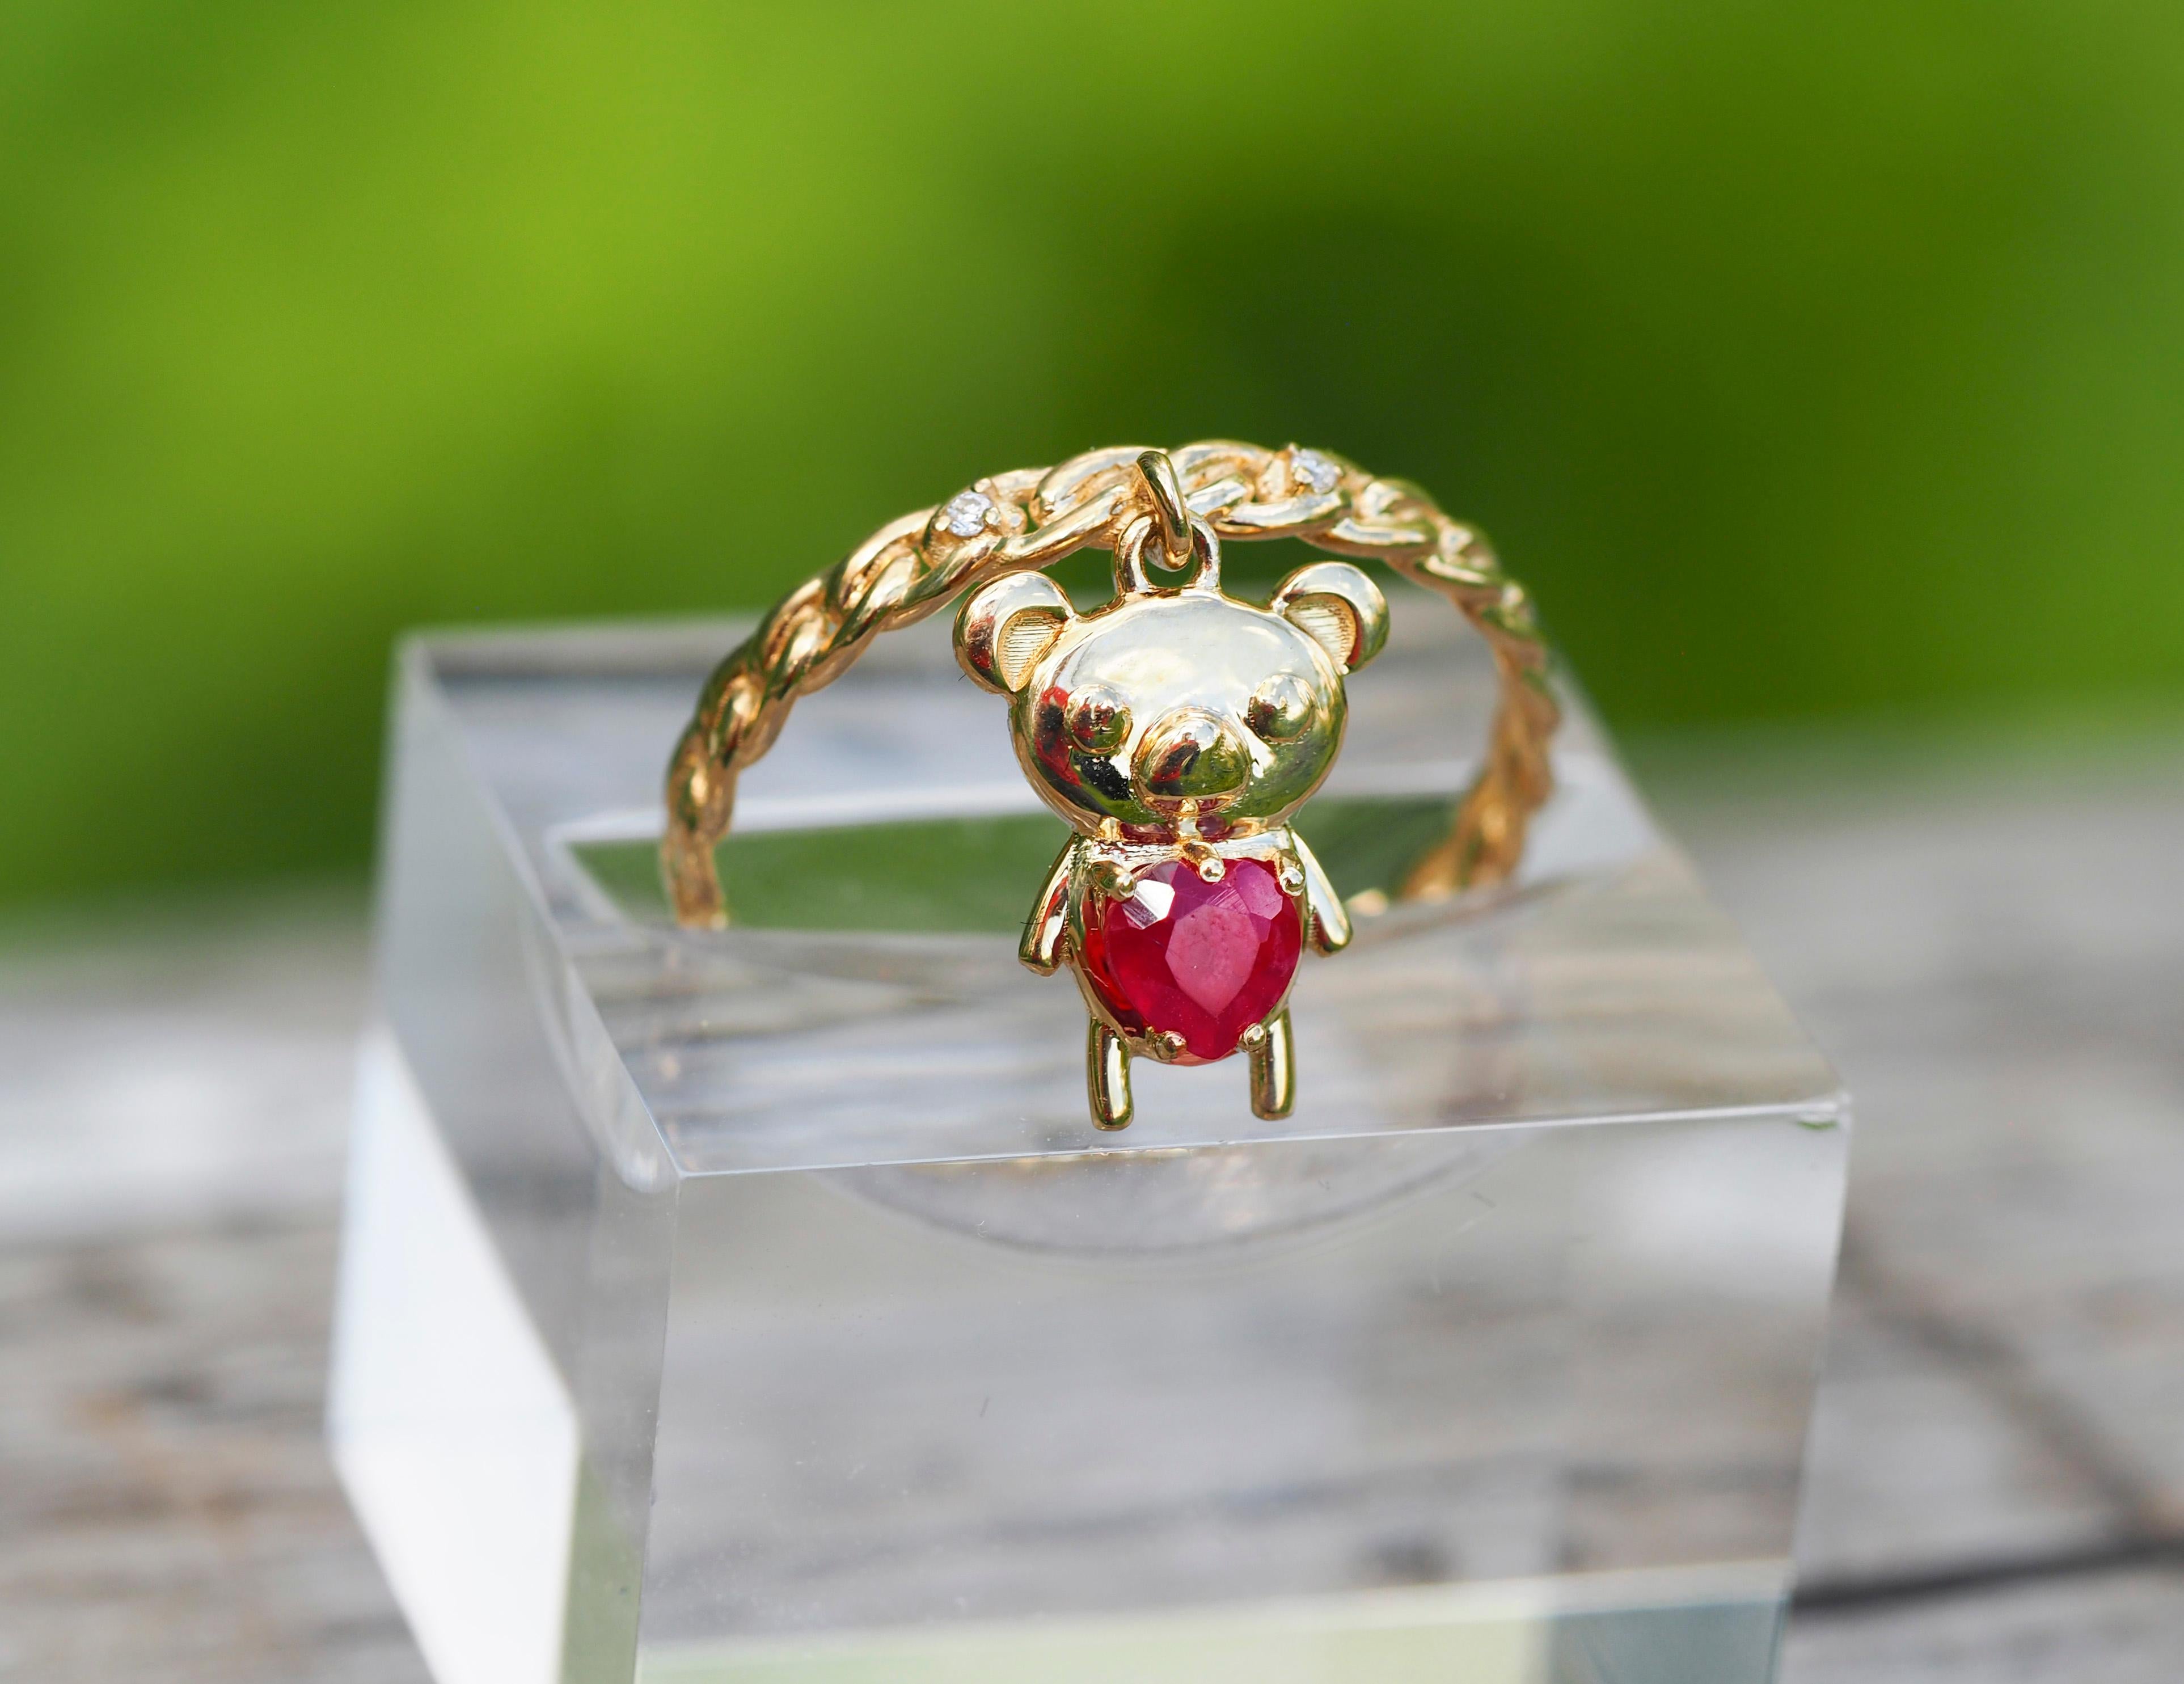 For Sale:  Heart ruby ring in 14 karat gold. Teddy Bear Gold Ring.  7